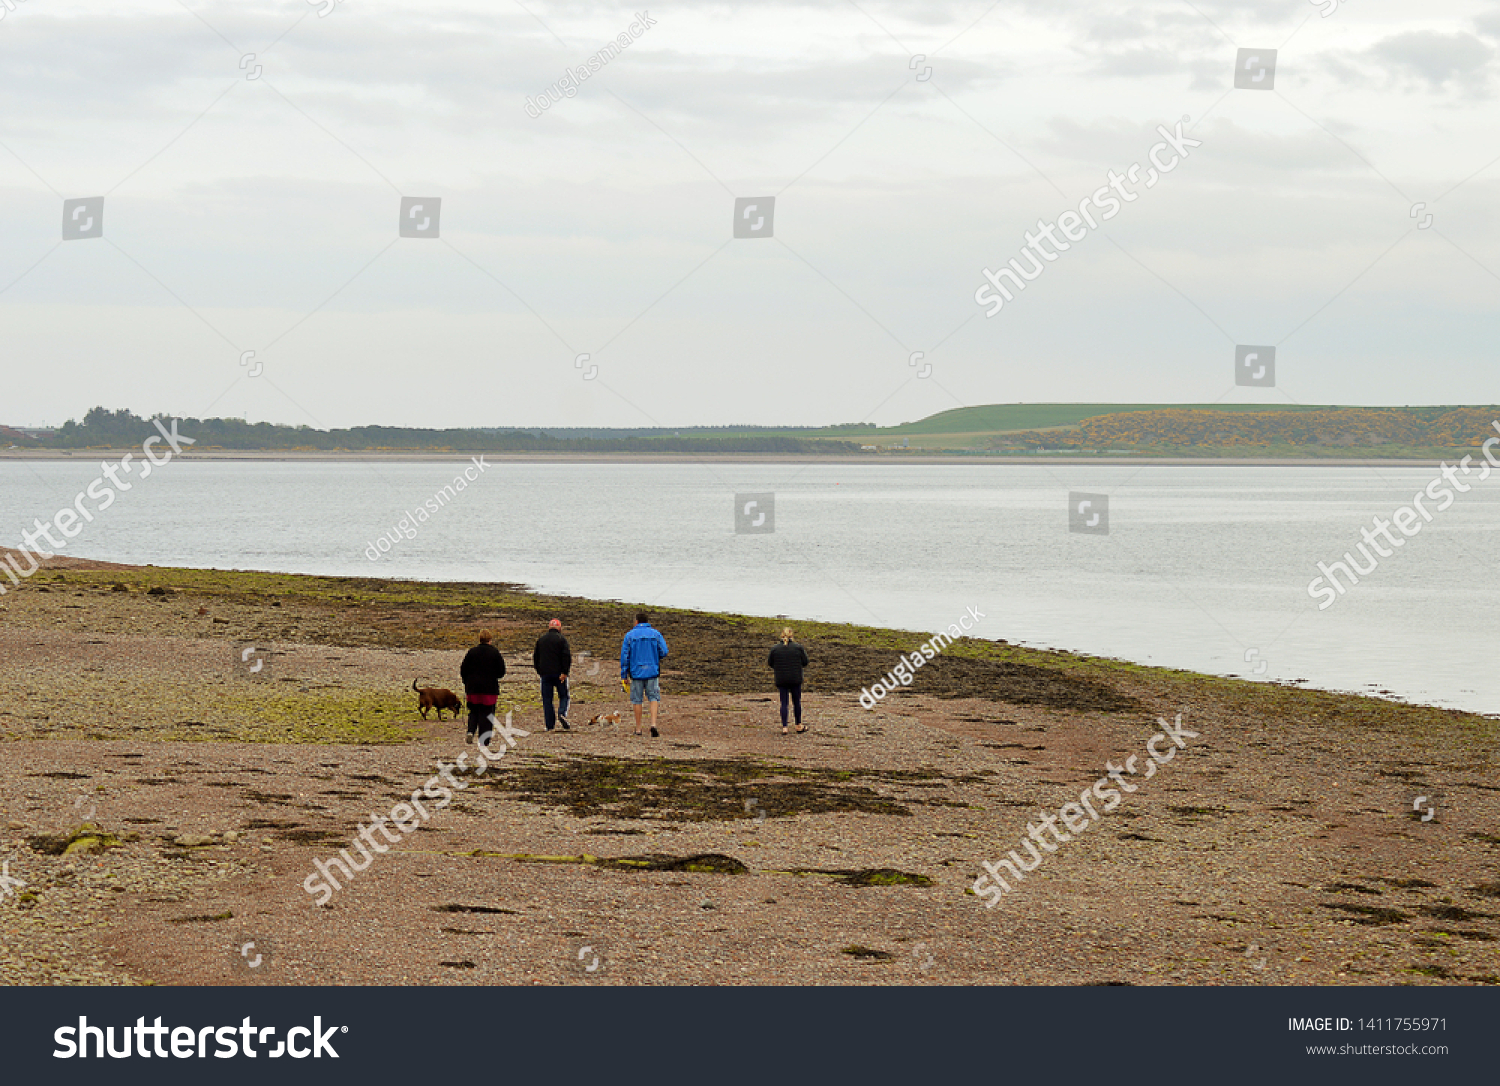 A spring walk on the beach by an anonymoujs group of two men, two women and two dogs on the shoreline of the Moray Firth at Chanonry Point, Rosemarkie, Scotland, a popular spot for dolphin watching. #1411755971